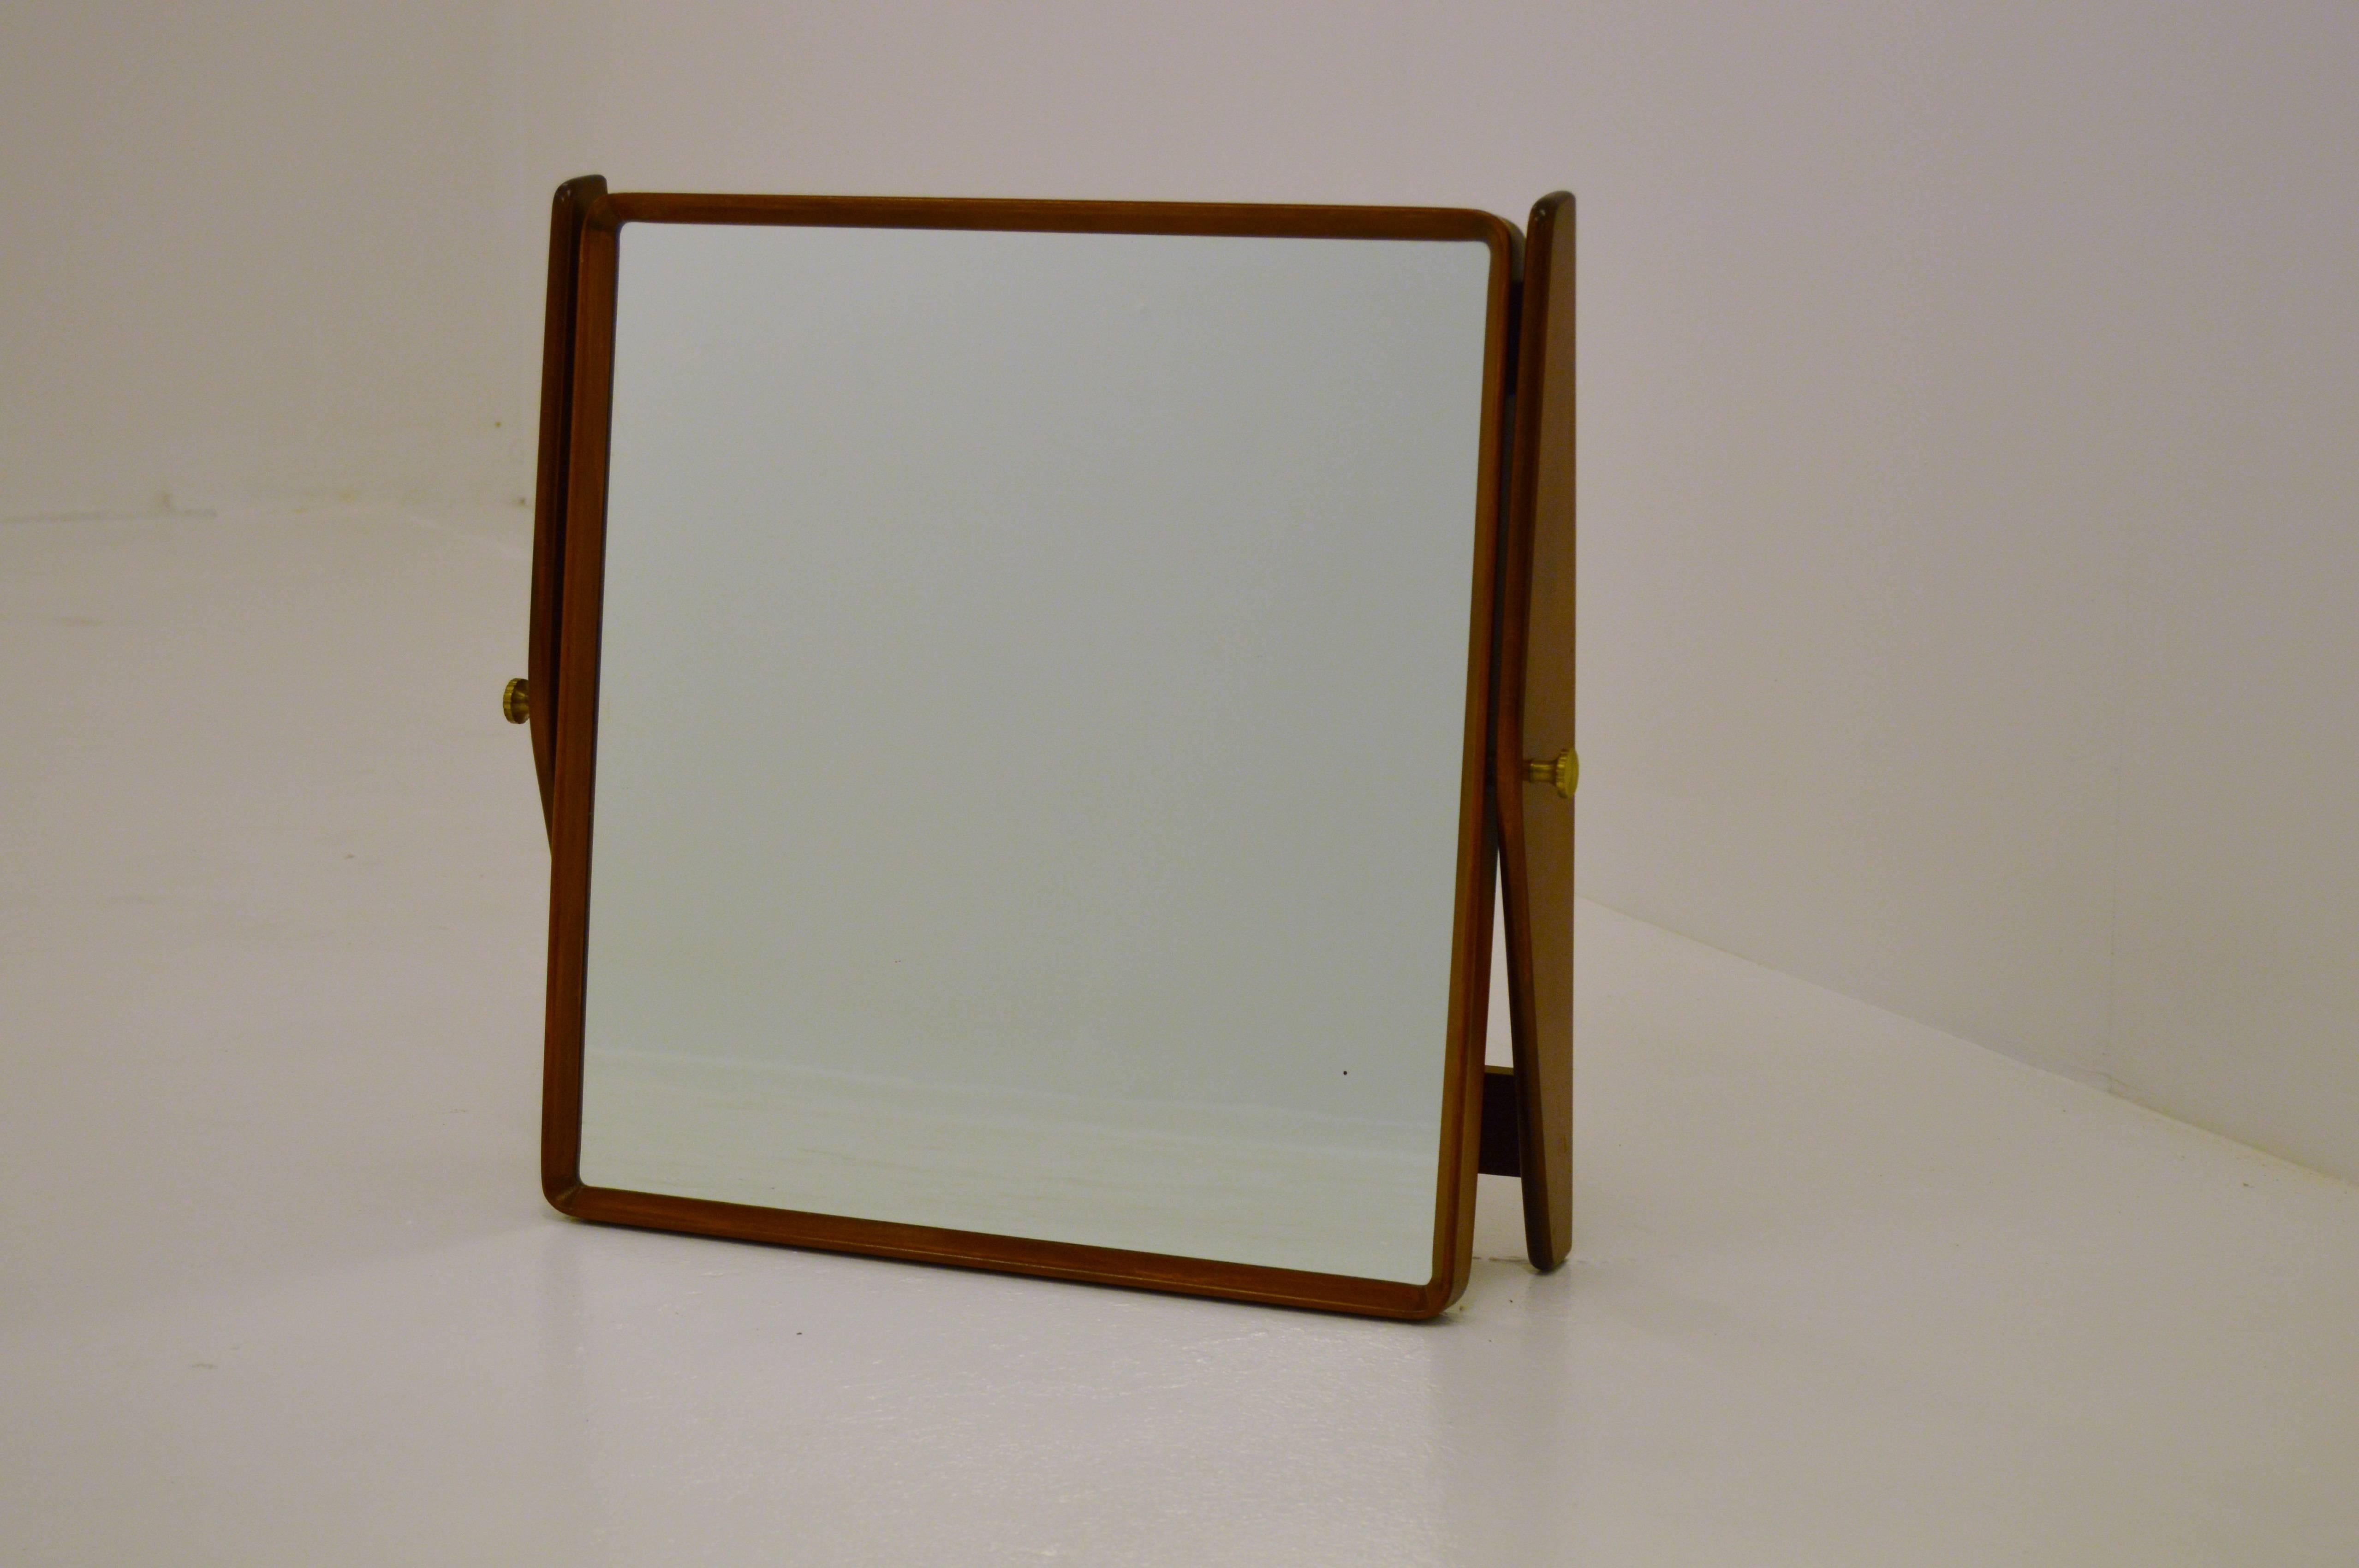 Very nice and rare mirror in mahogany with brass fittings. Can be mounted on a wall or be standing on a table.
Adjustable angle.
Probably manufactured in Sweden during 1940s or early 1950s.